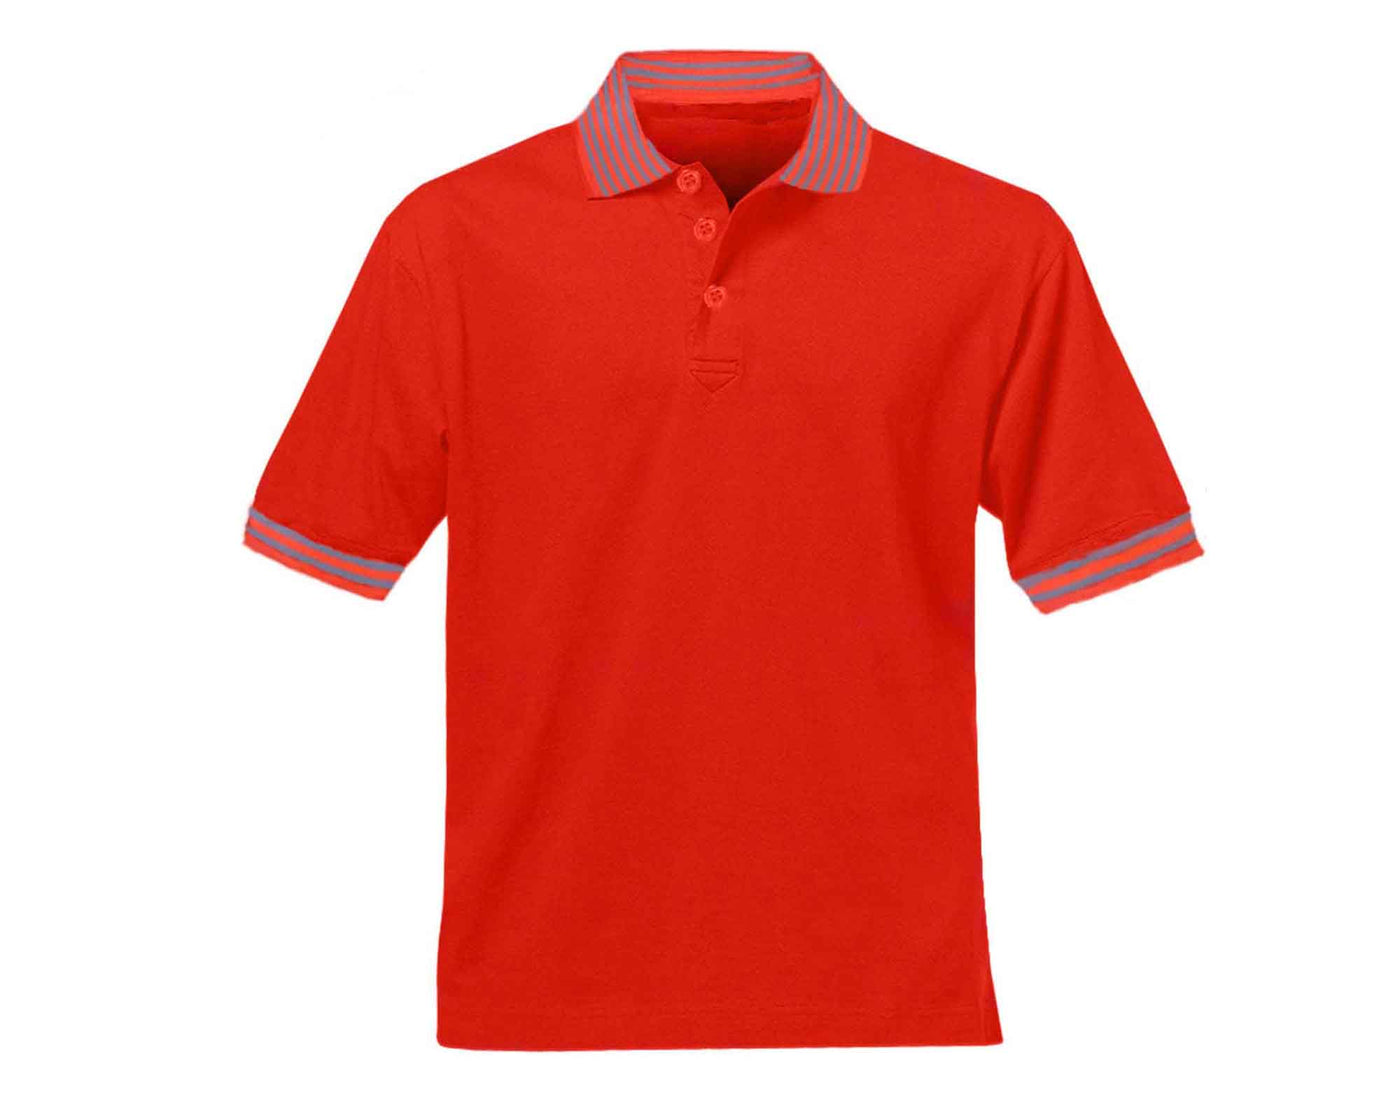 red polo shirt for IHOP Diswasher uniform